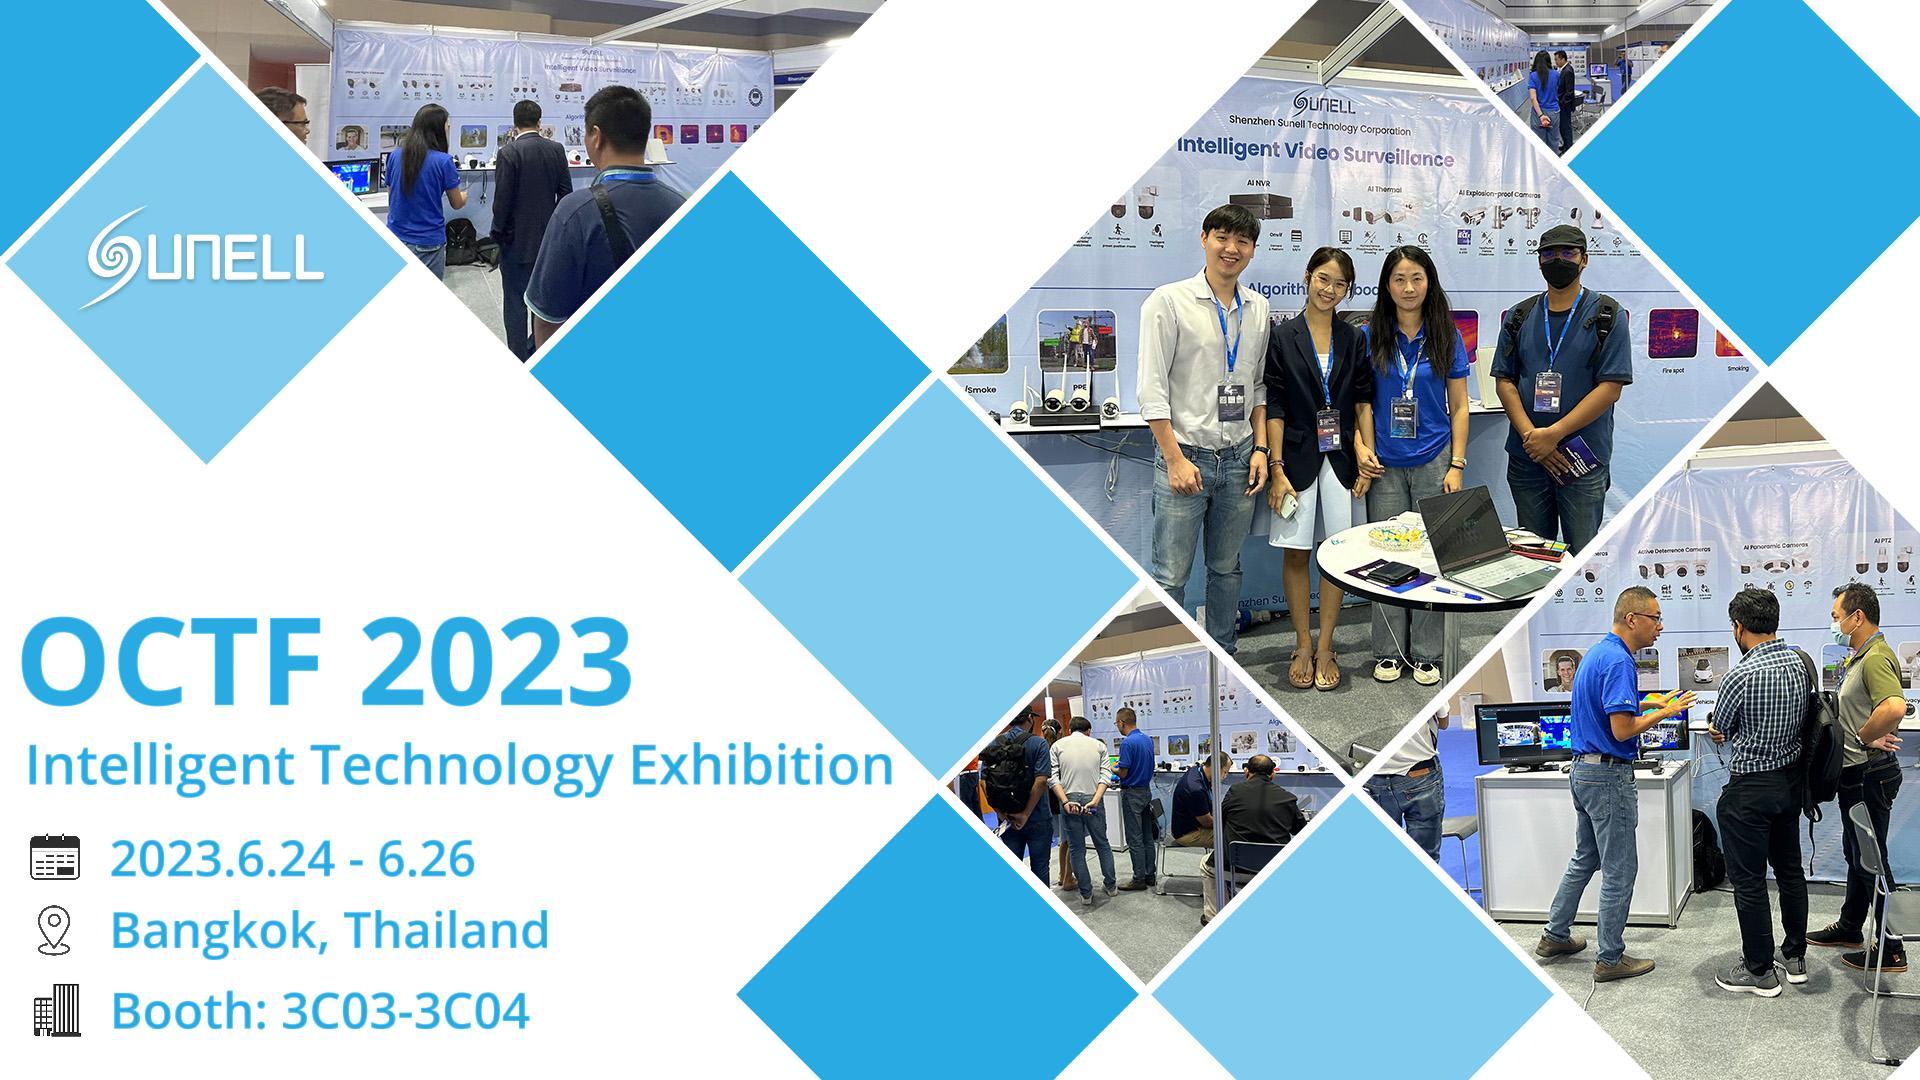 Sunell_Excels_at_the_2023_OCTF_in_Bangkok,_Showcasing_Innovative_Solutions.jpg